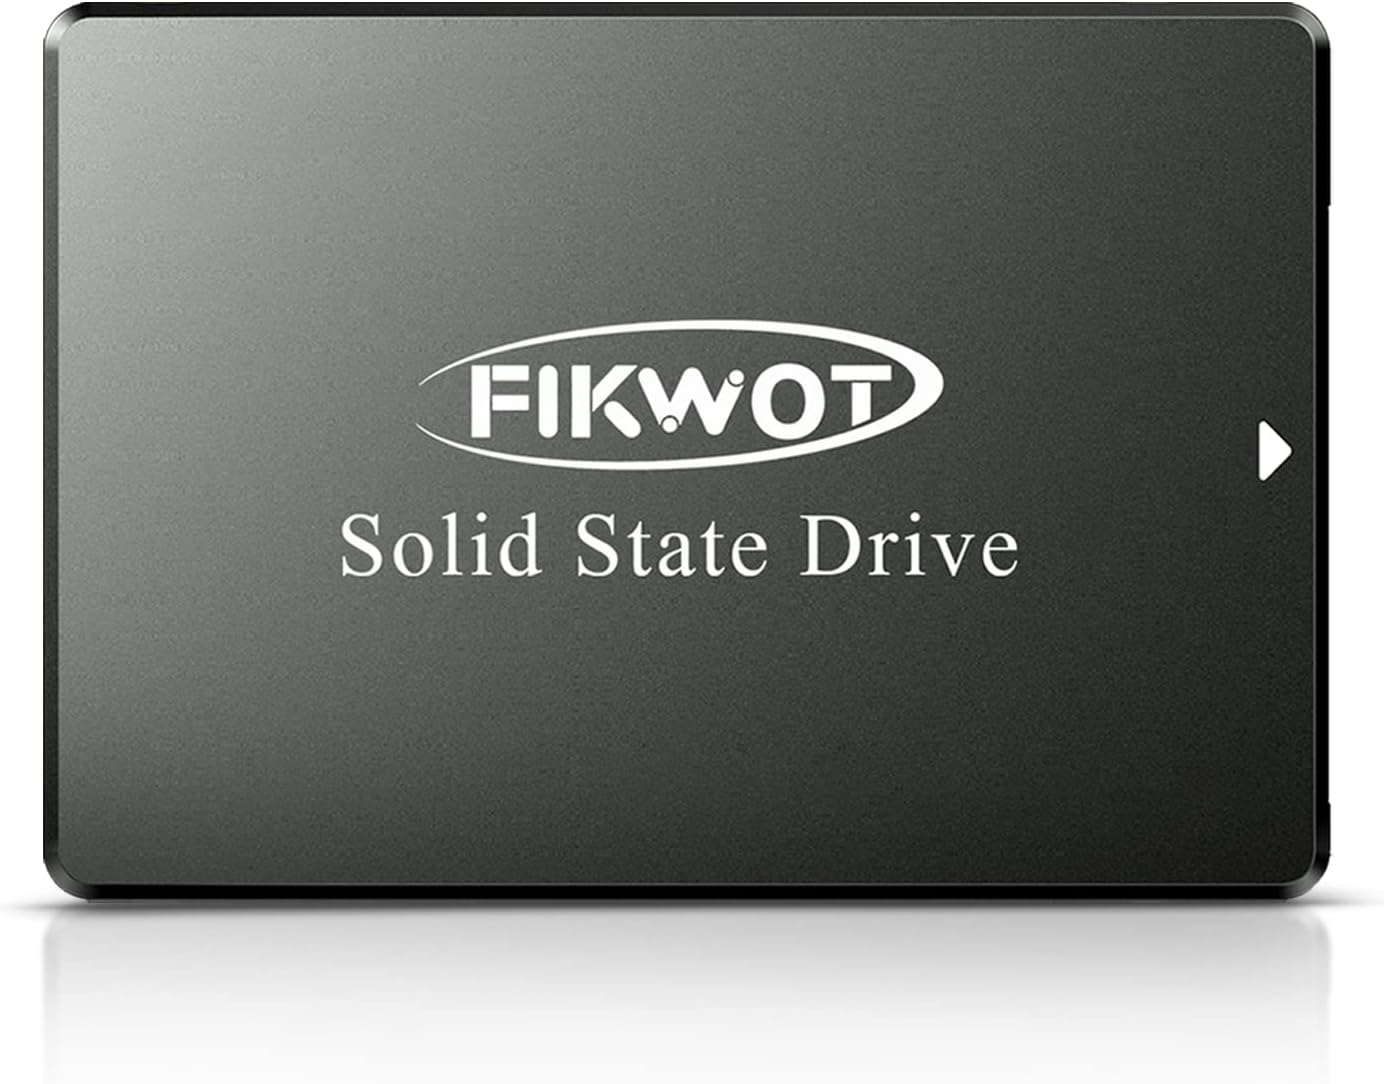 FS810 1TB SSD SATA III 2.5 6GB/s, Internal Solid State Drive 3D NAND Flash (Read/Write Speed up to 550/500 MB/s) Compatible with Laptop  PC Desktop